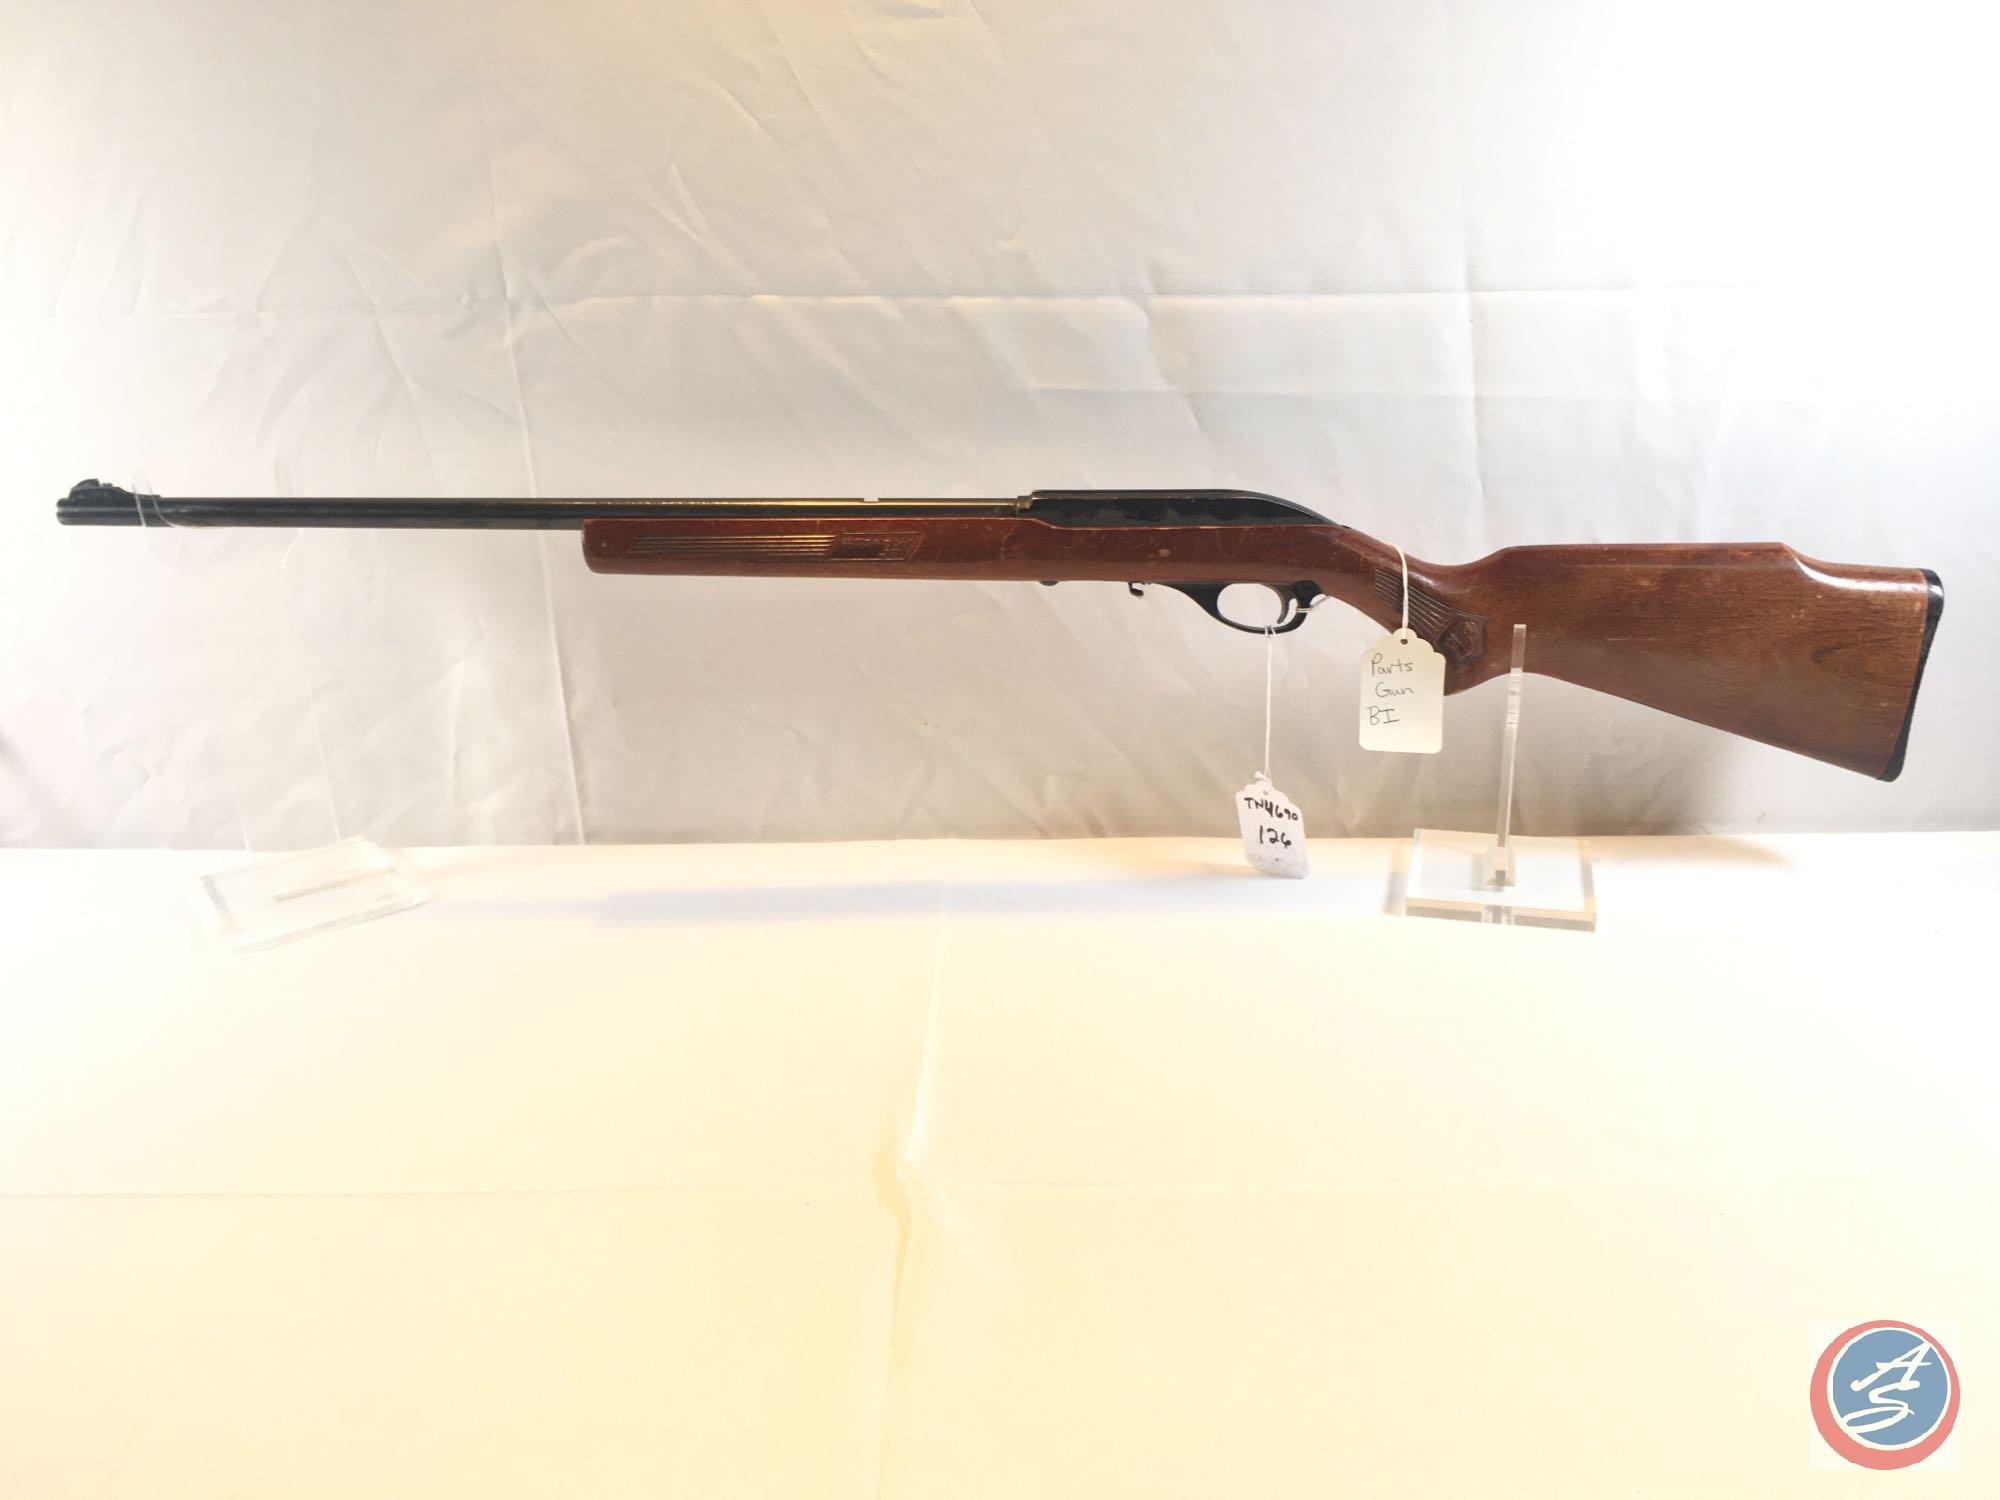 Marlin, Model:CC550, .22cal. Rifle, Ser#:25496053...NOTE: THIS GUN IS BEING SOLD AS PARTS ONLY - NOT